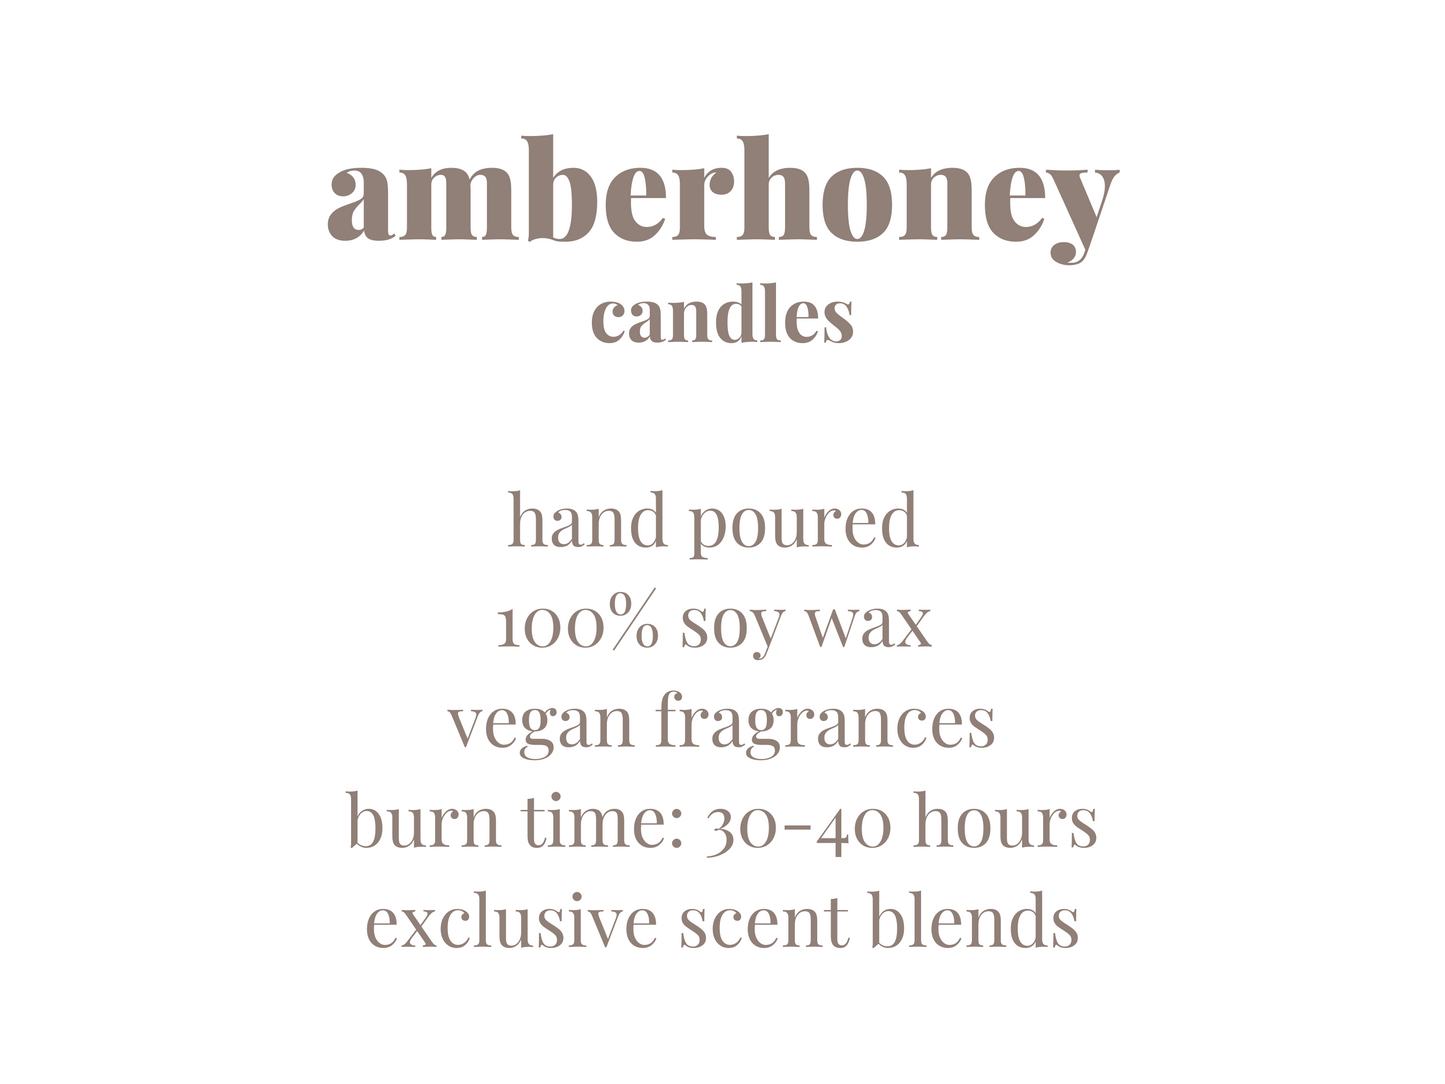 400g amber & honey soy wax candle (3 wick)